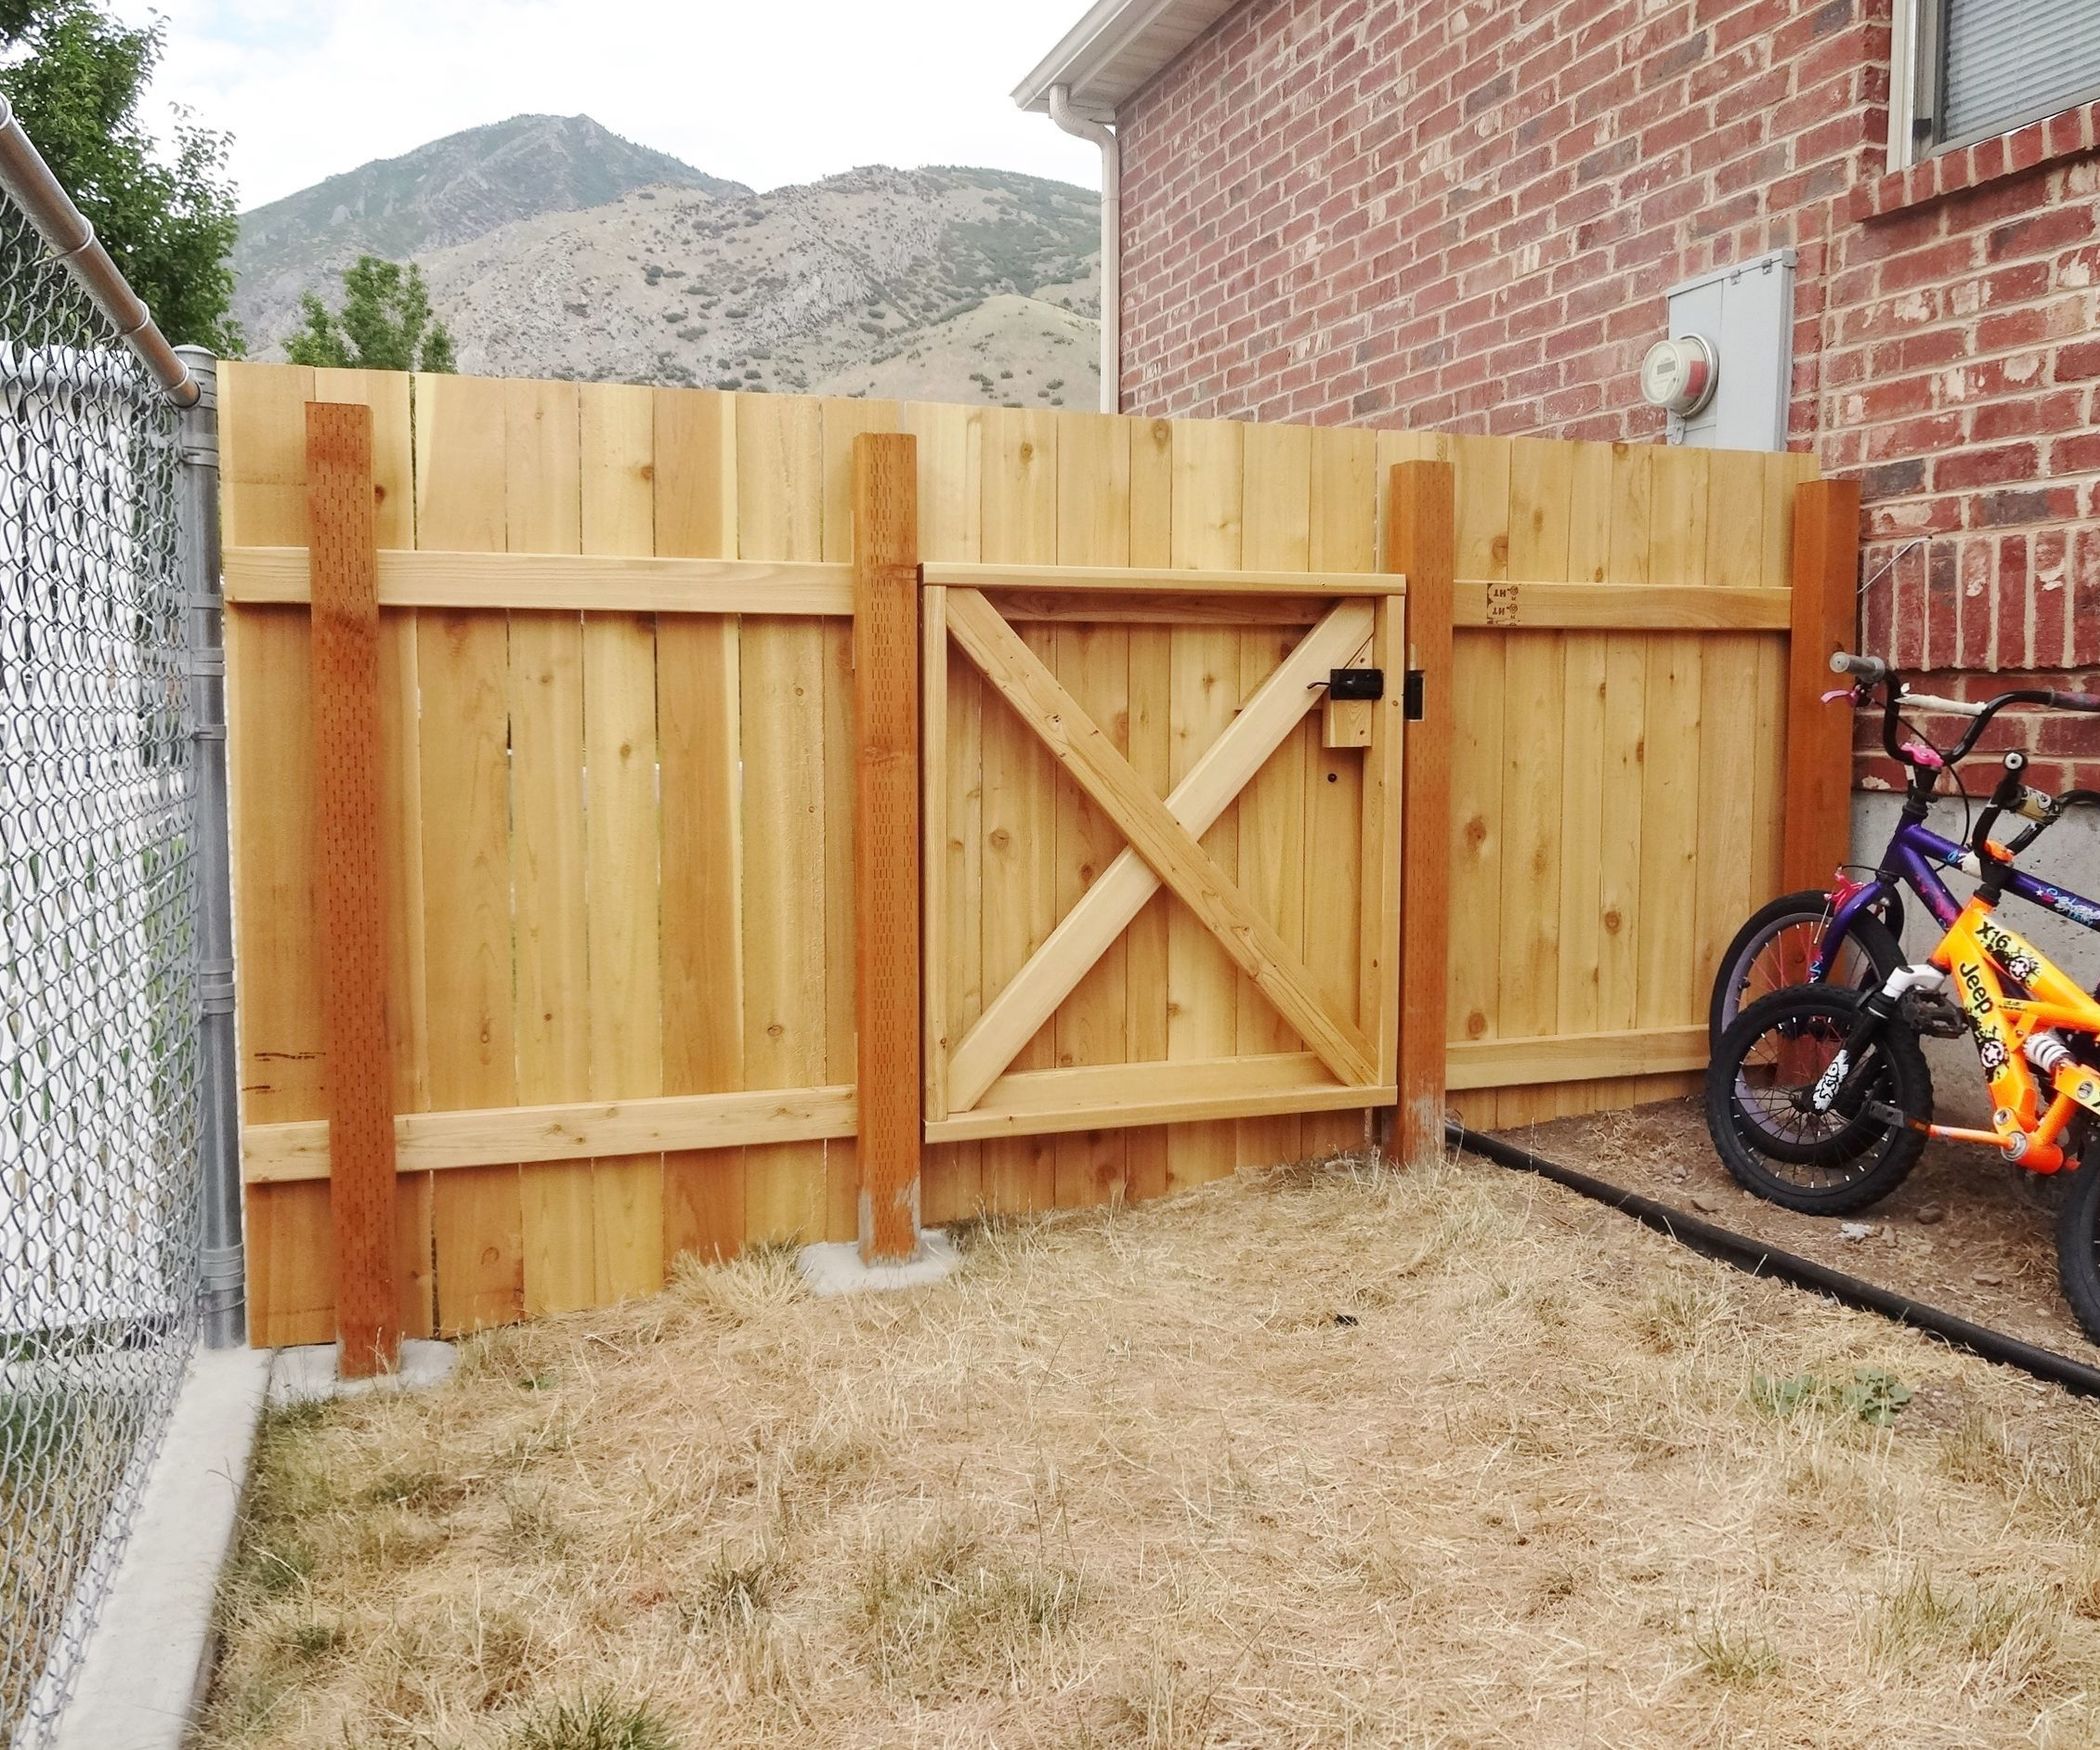 Build a Wooden Fence and Gate